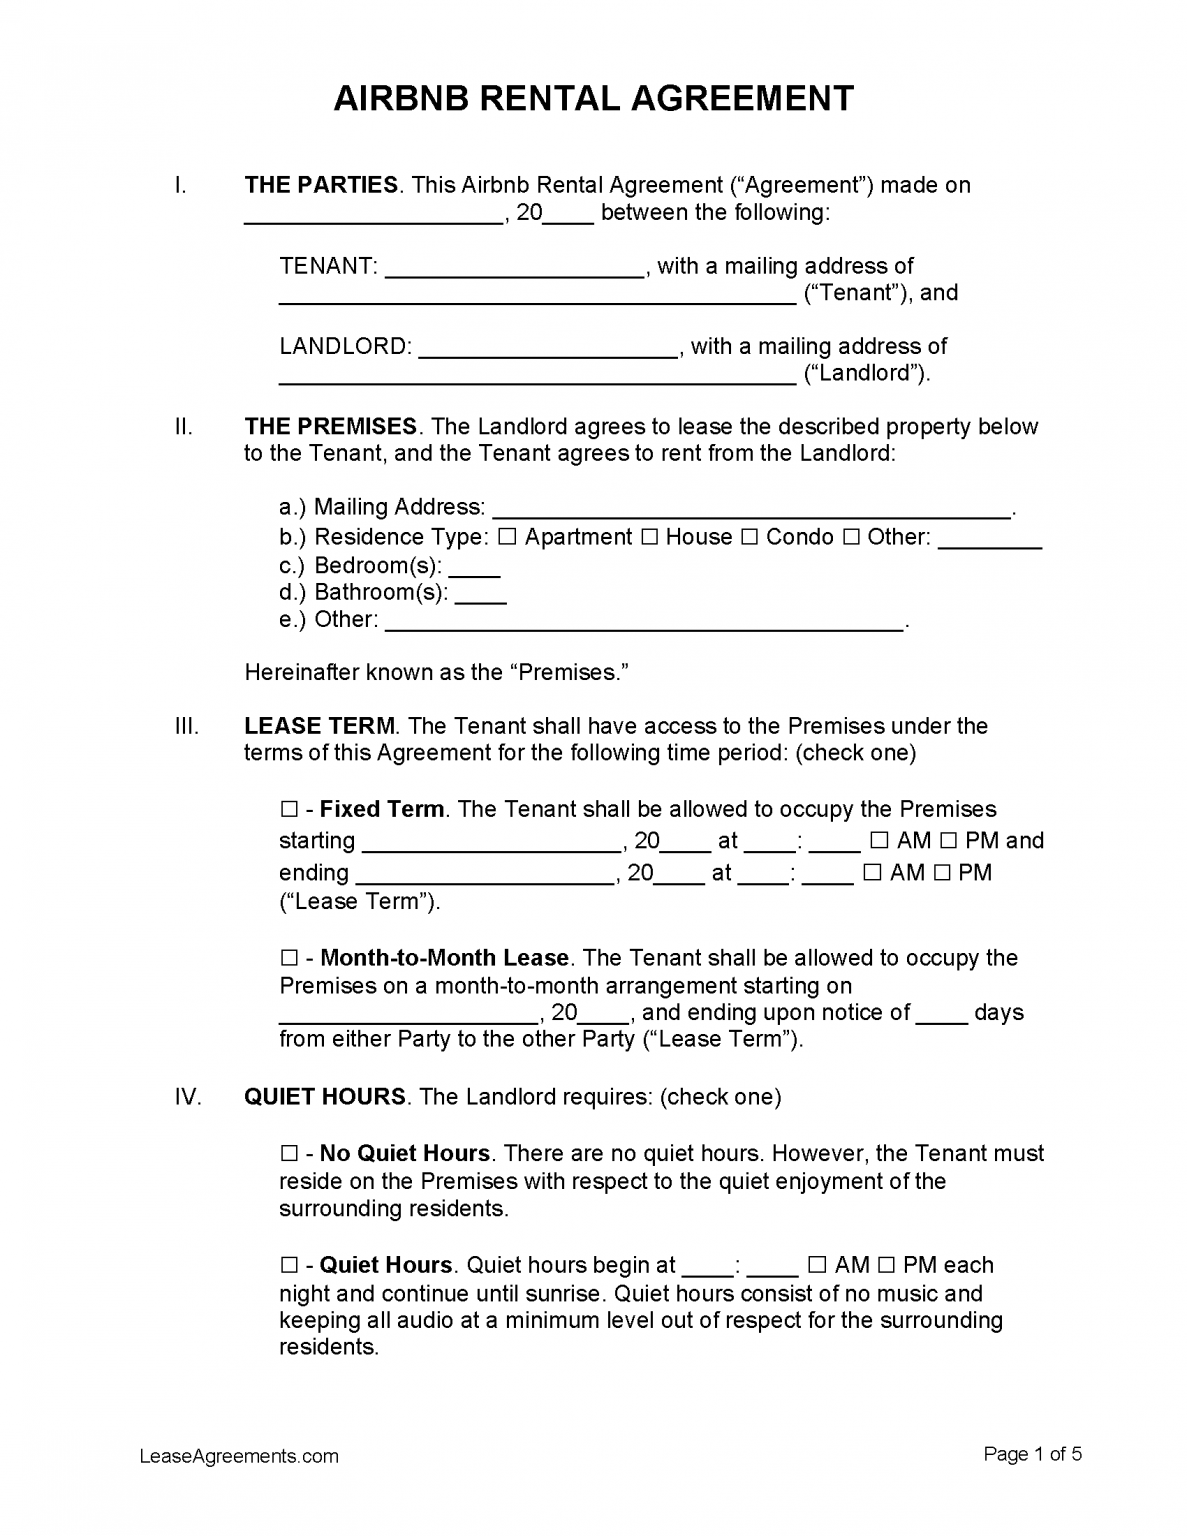 Free Airbnb Rental Lease Agreement Template PDF WORD RTF